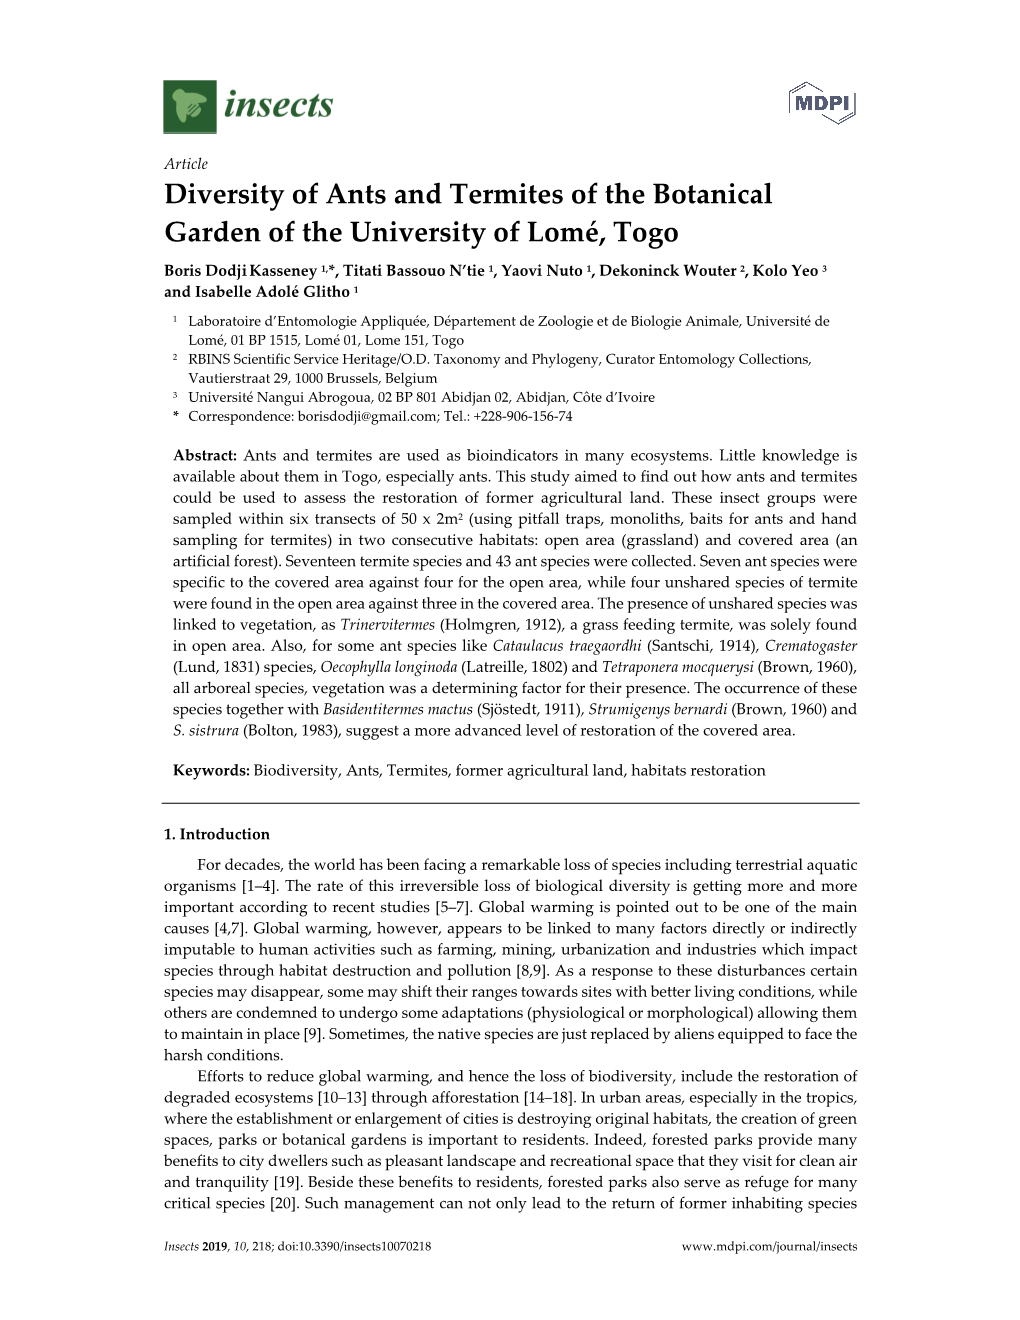 Diversity of Ants and Termites of the Botanical Garden of the University of Lomé, Togo